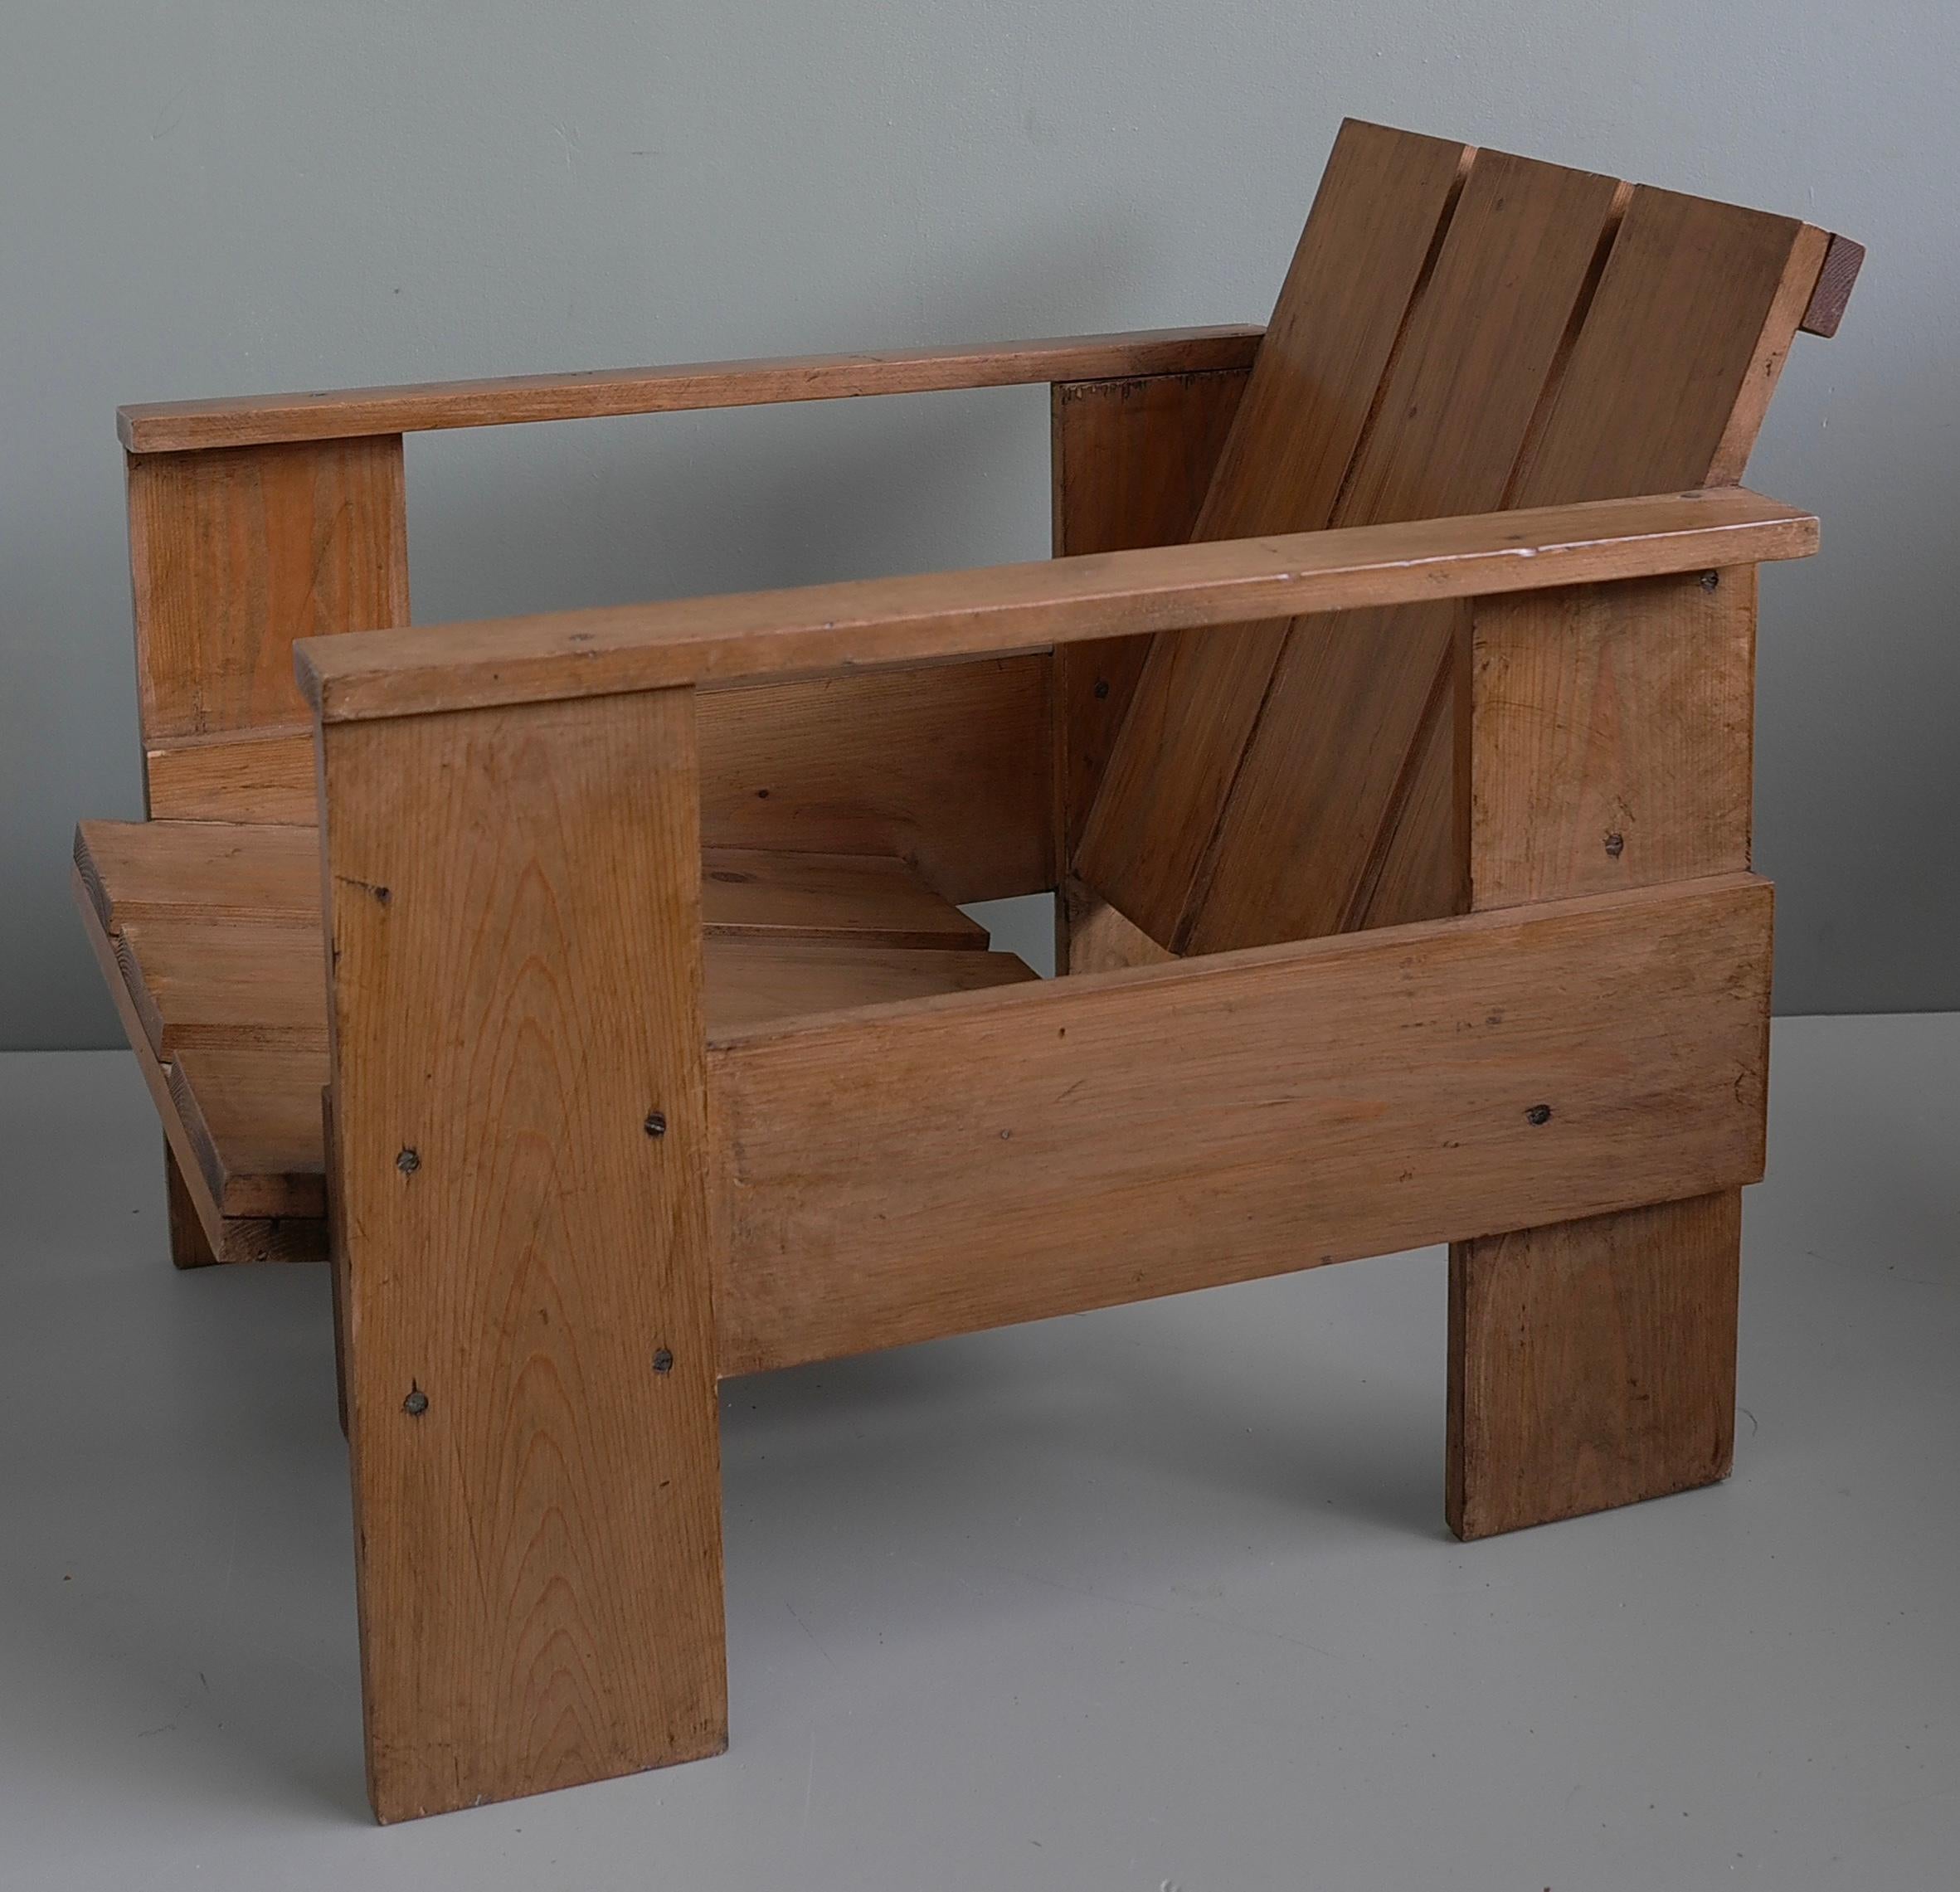 Mid-Century Modern Crate Chair in style of Gerrit Rietveld, The Netherlands 1960's For Sale